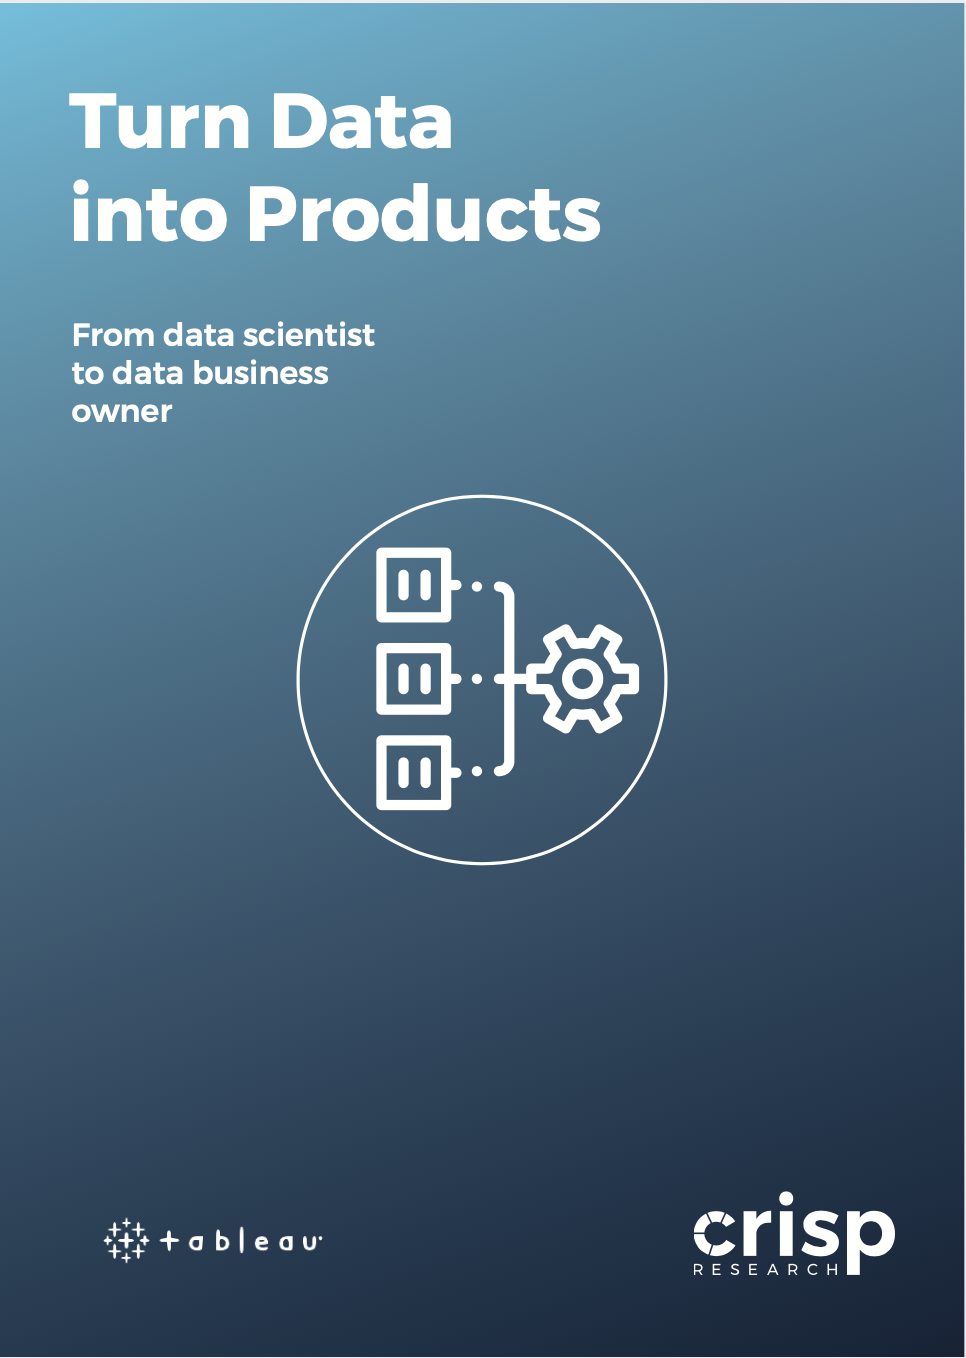 Turn Data into Products